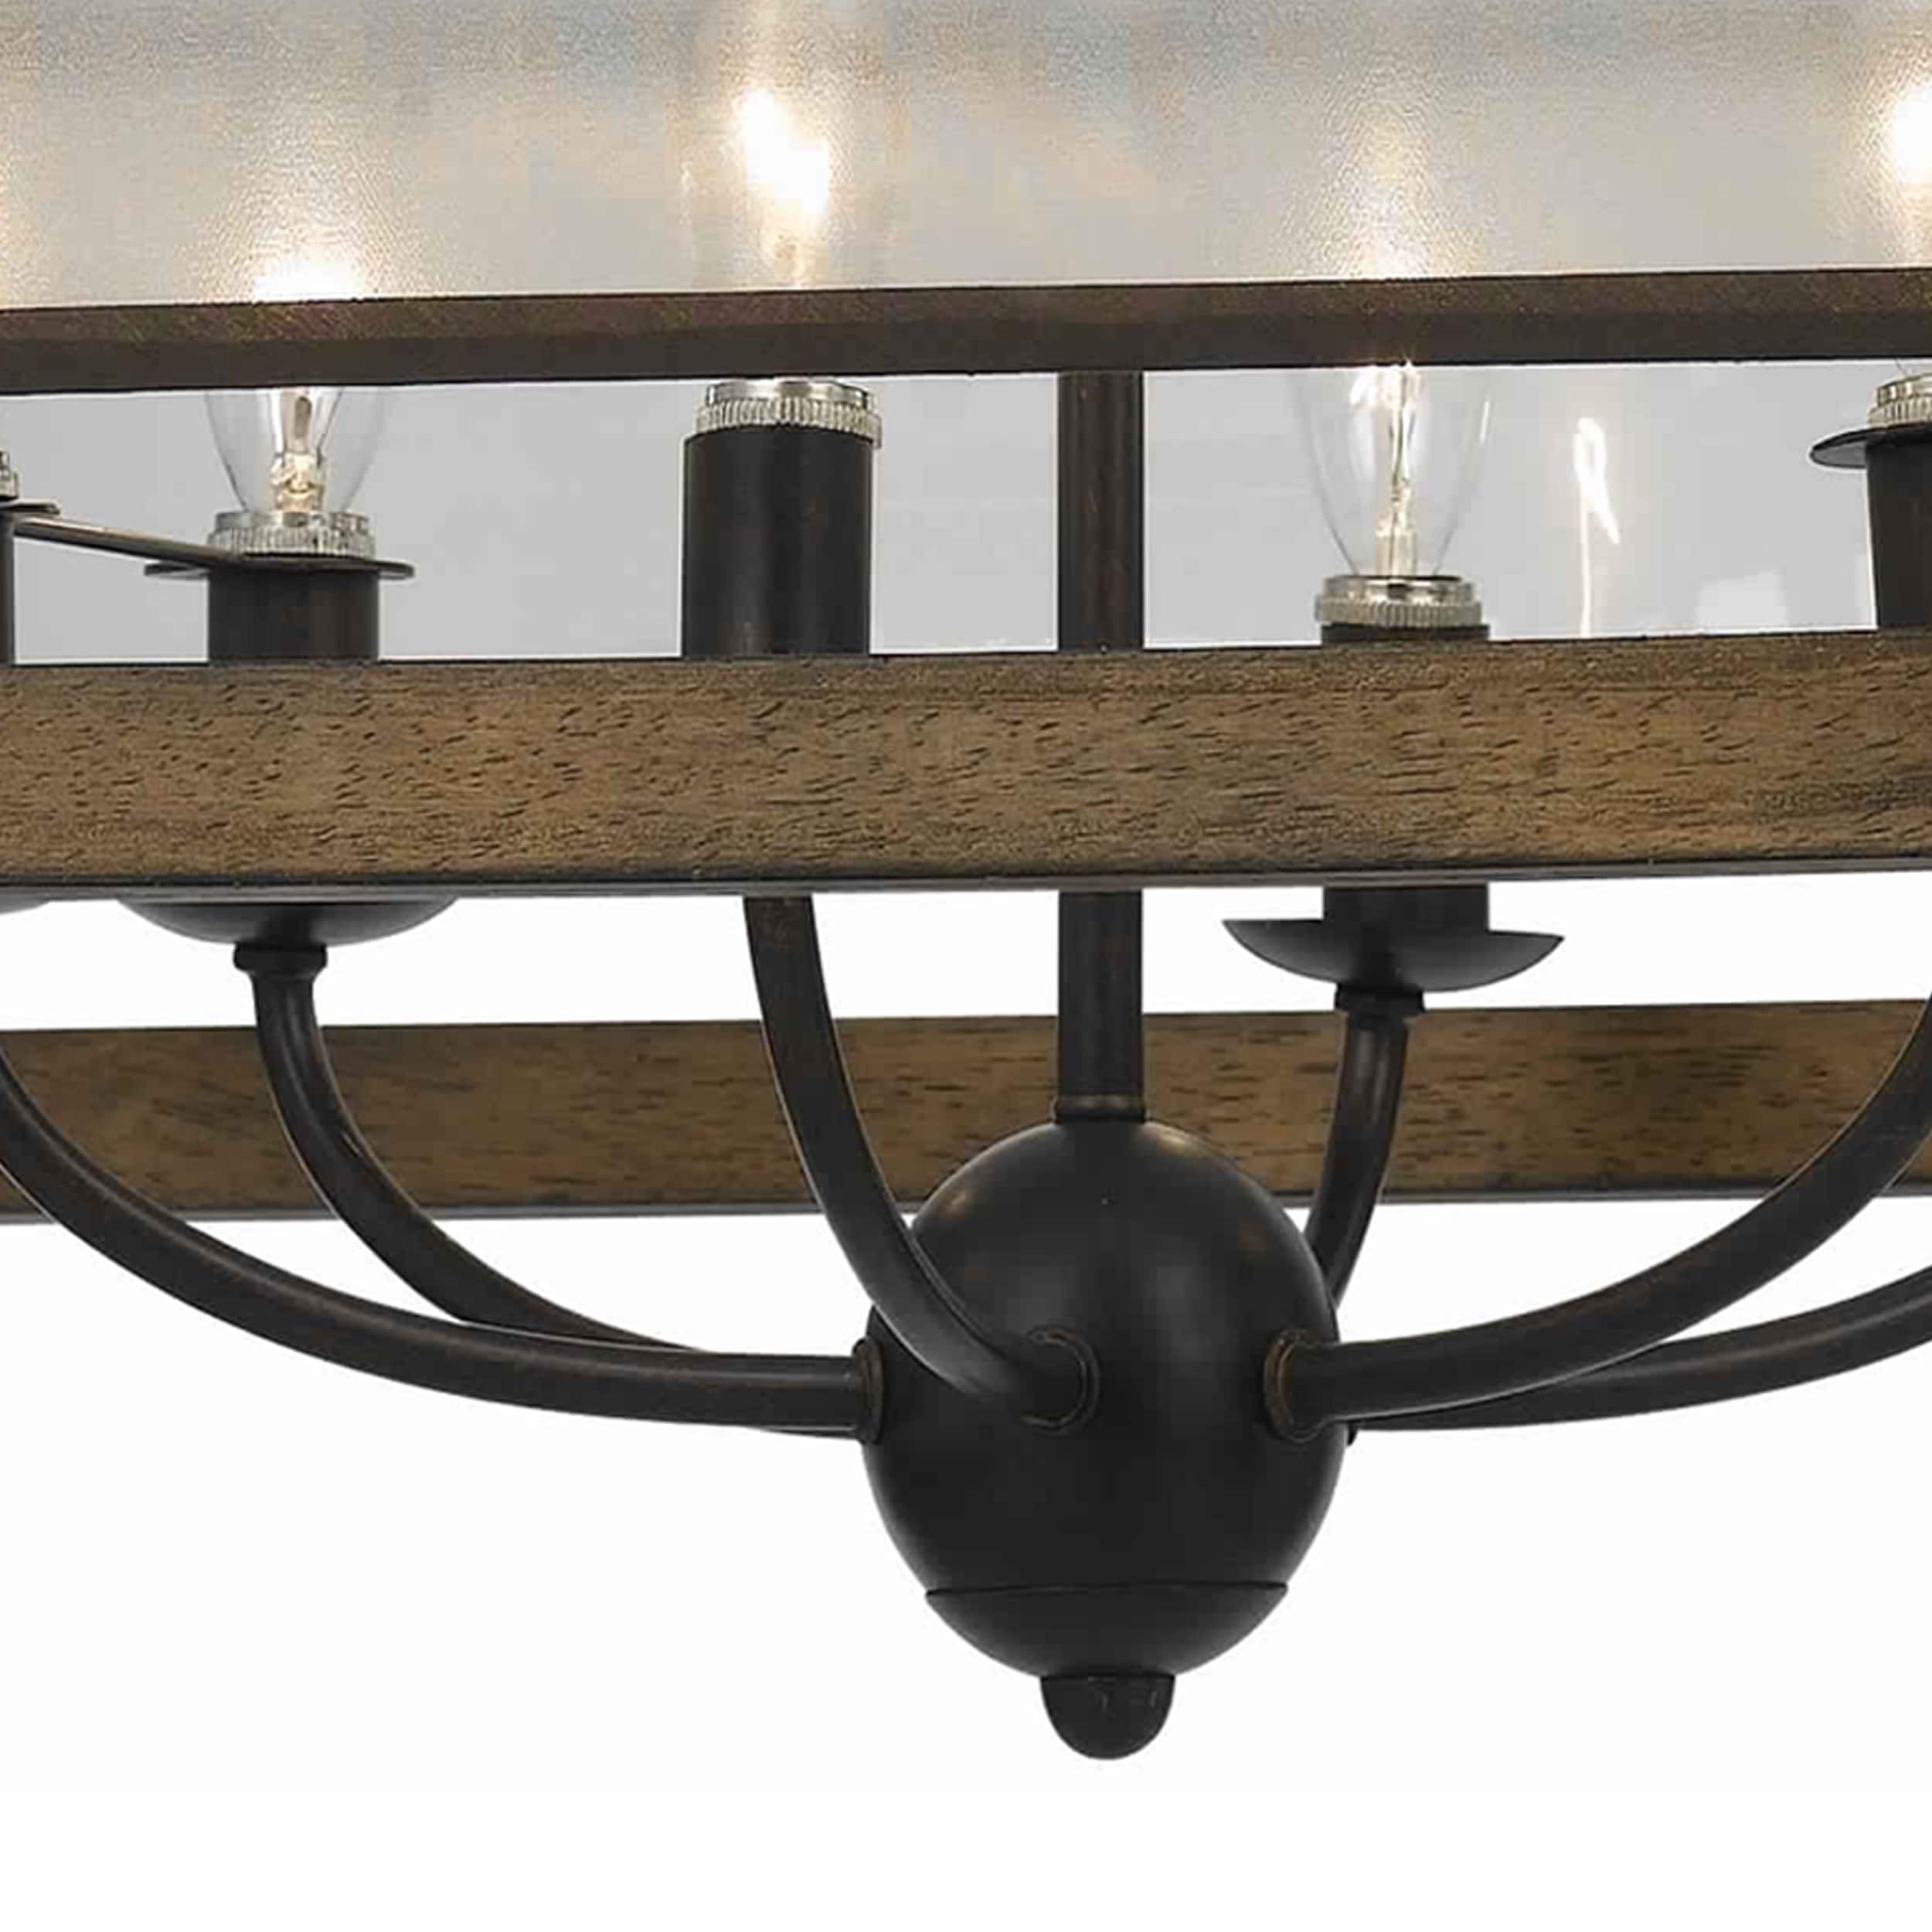 6 Bulb Square Chandelier with Wooden Frame and Organza Striped Shade, Brown - image 2 of 5